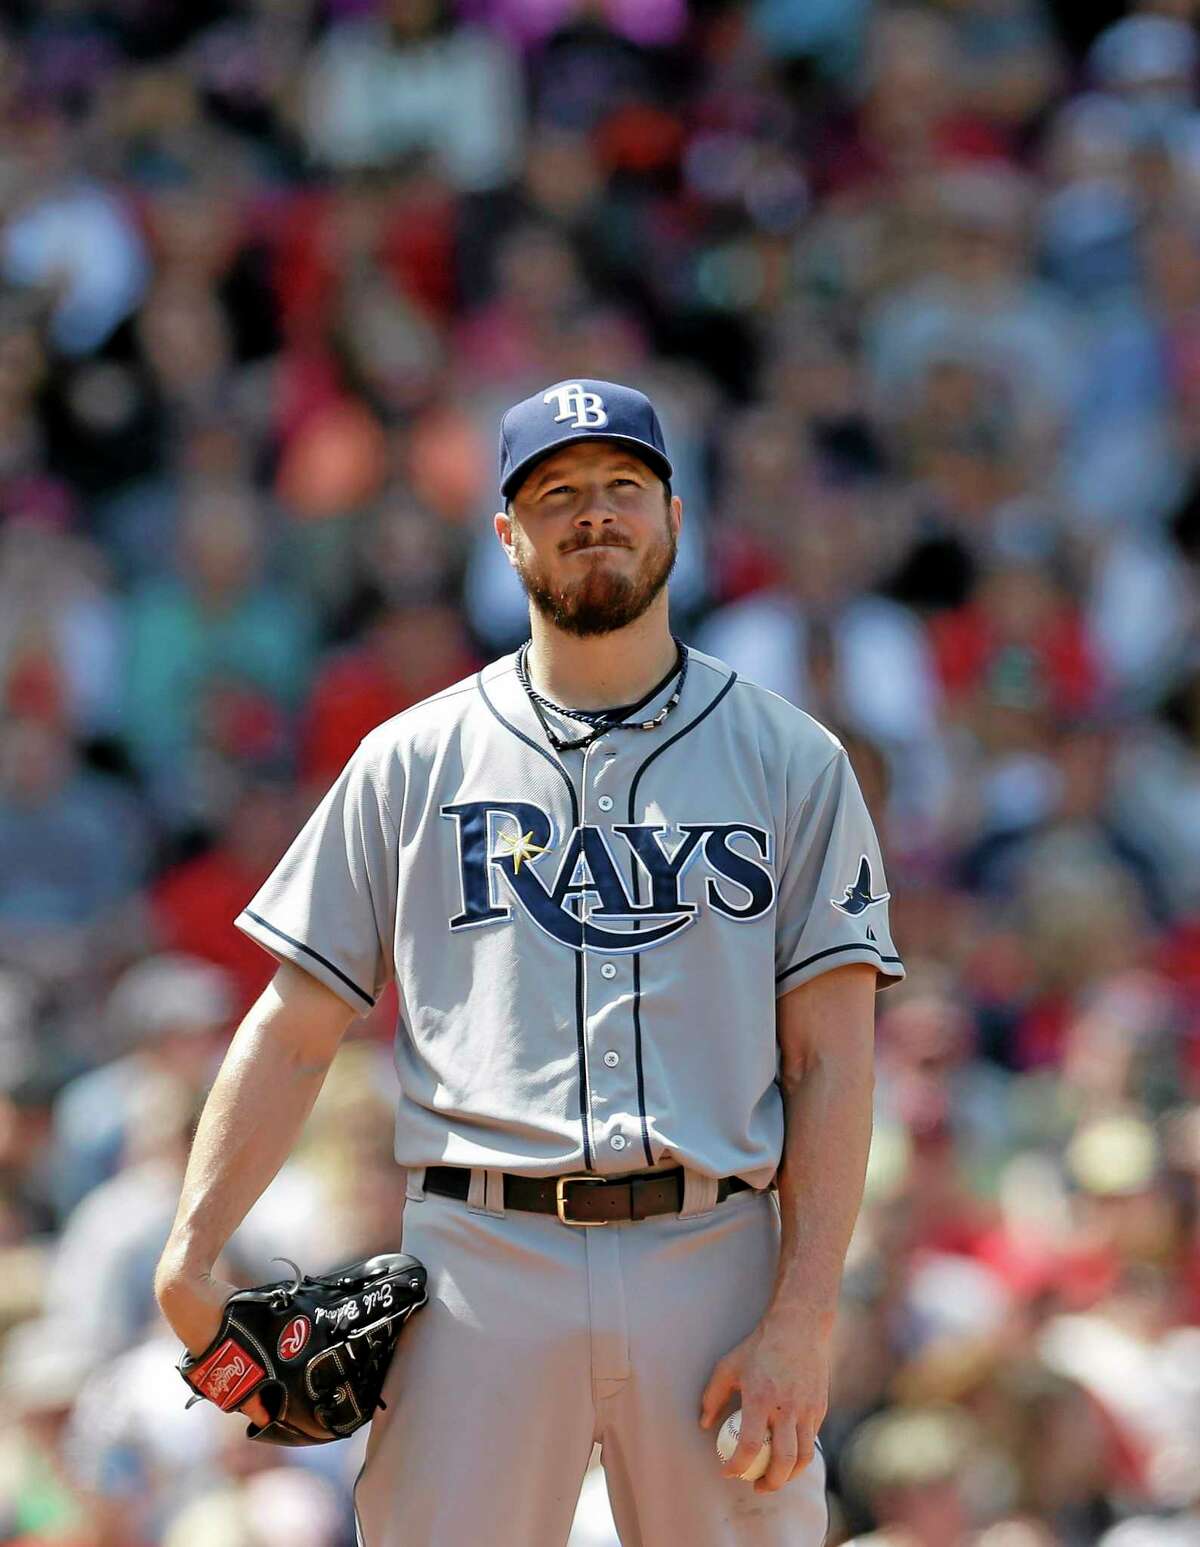 Tampa Bay Rays pitcher Erik Bedard grimaces as he looks up from the mound after giving up runs to the Boston Red Sox in the fourth inning Sunday.